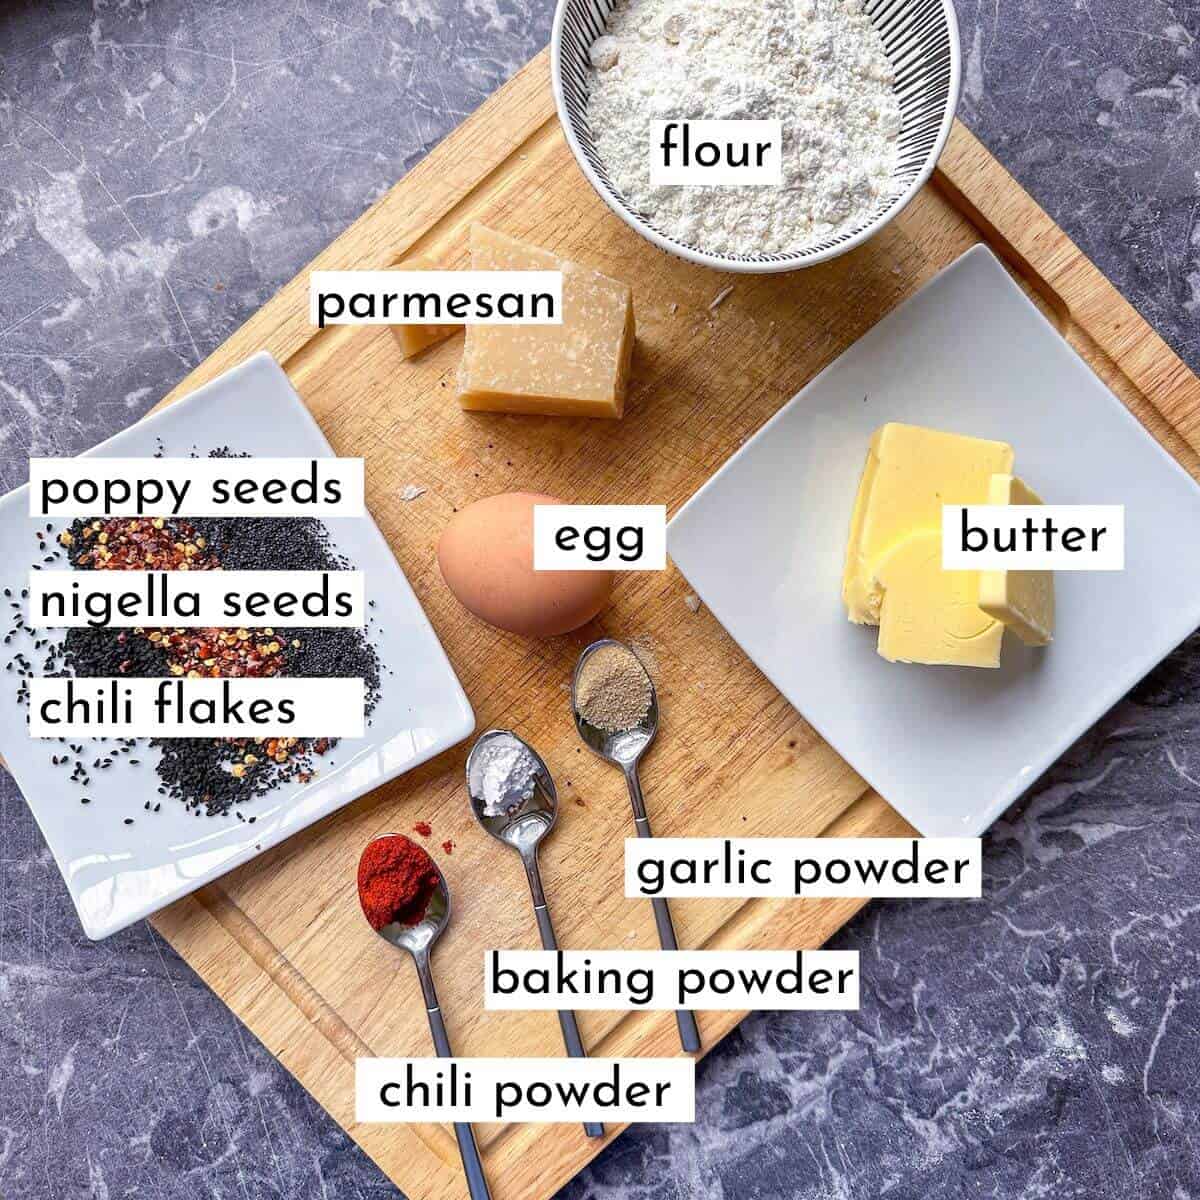 Ingredients for savory parmesan cookies laid out on a worktop. Flour, egg, butter, baking powder, chili powder, garlic powder, parmesan, nigella seeds and chili flakes. 